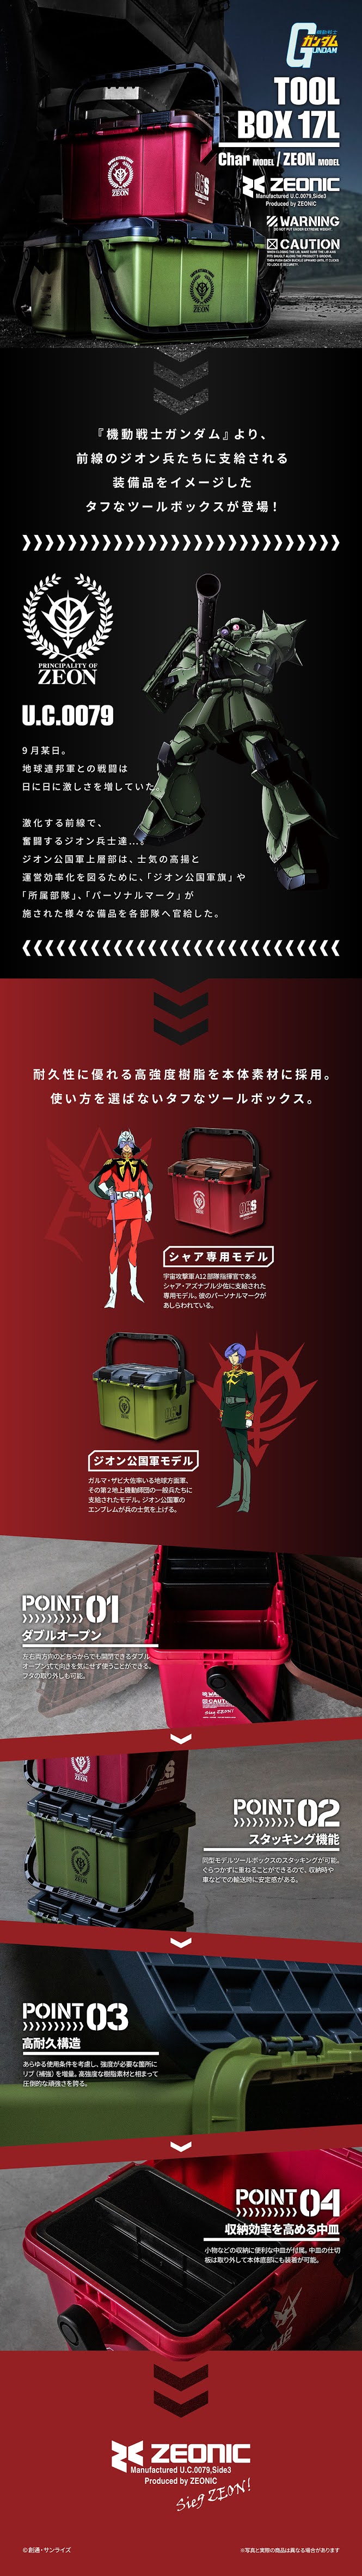 Mobile Suit Gundam Tool Box 17L (Principality of Zeon Army Model (Green) & Char Aznable Model (Red)), Plex